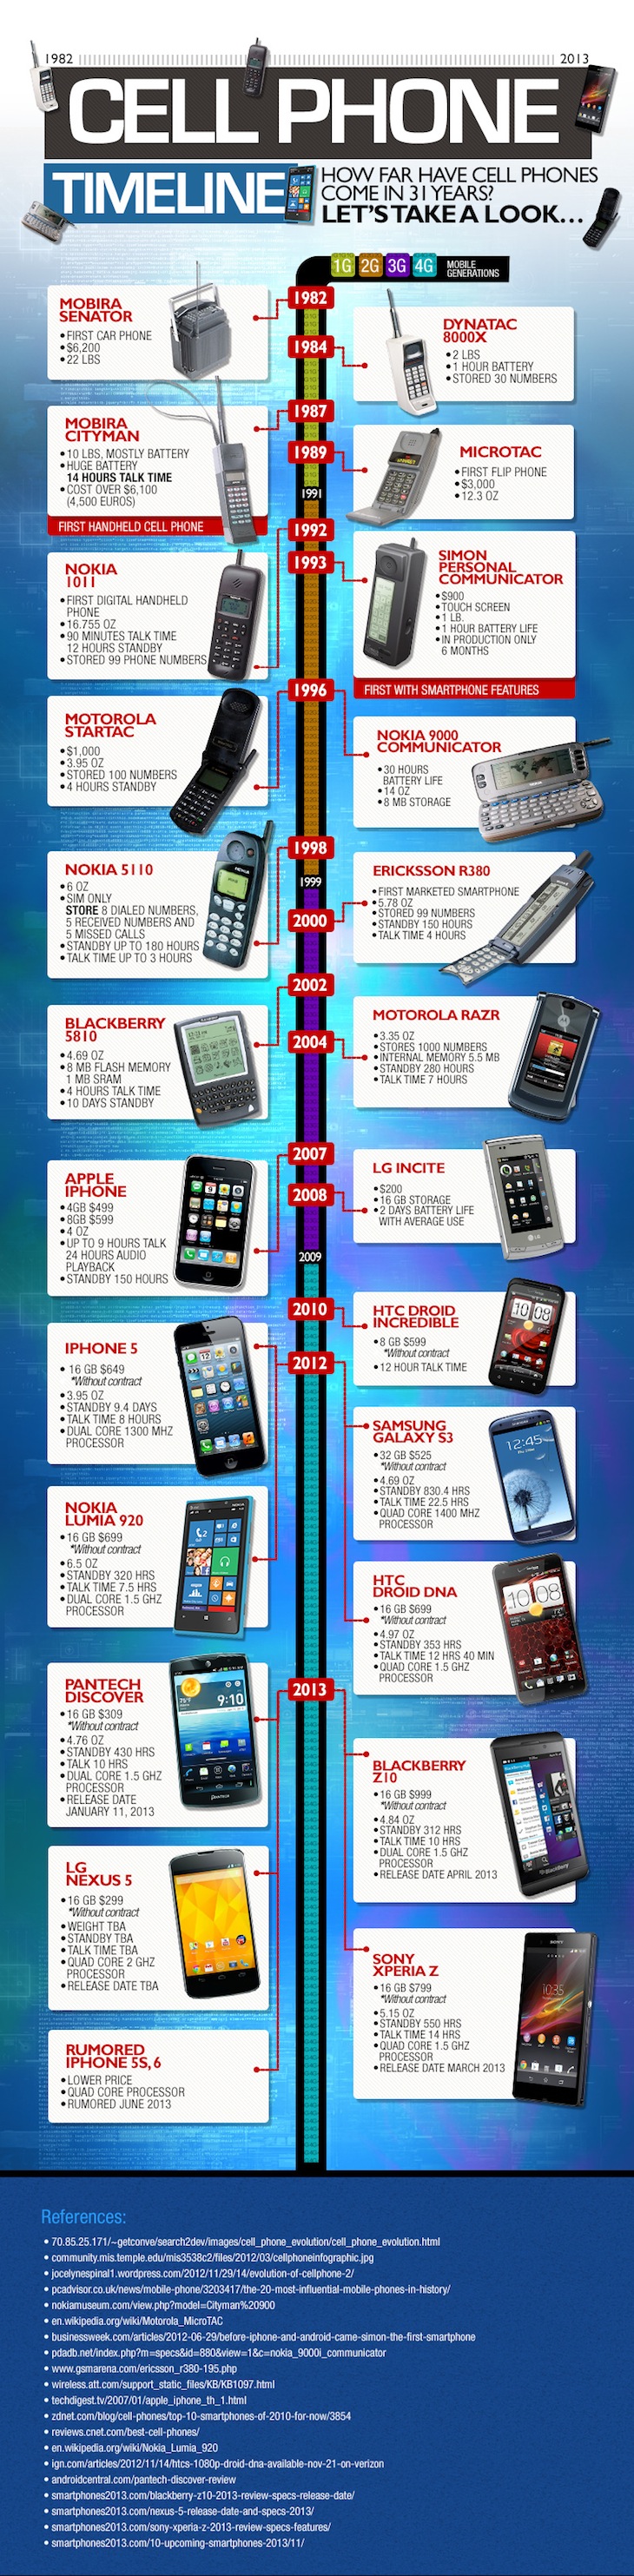 Cell-Phone-Timeline (1)